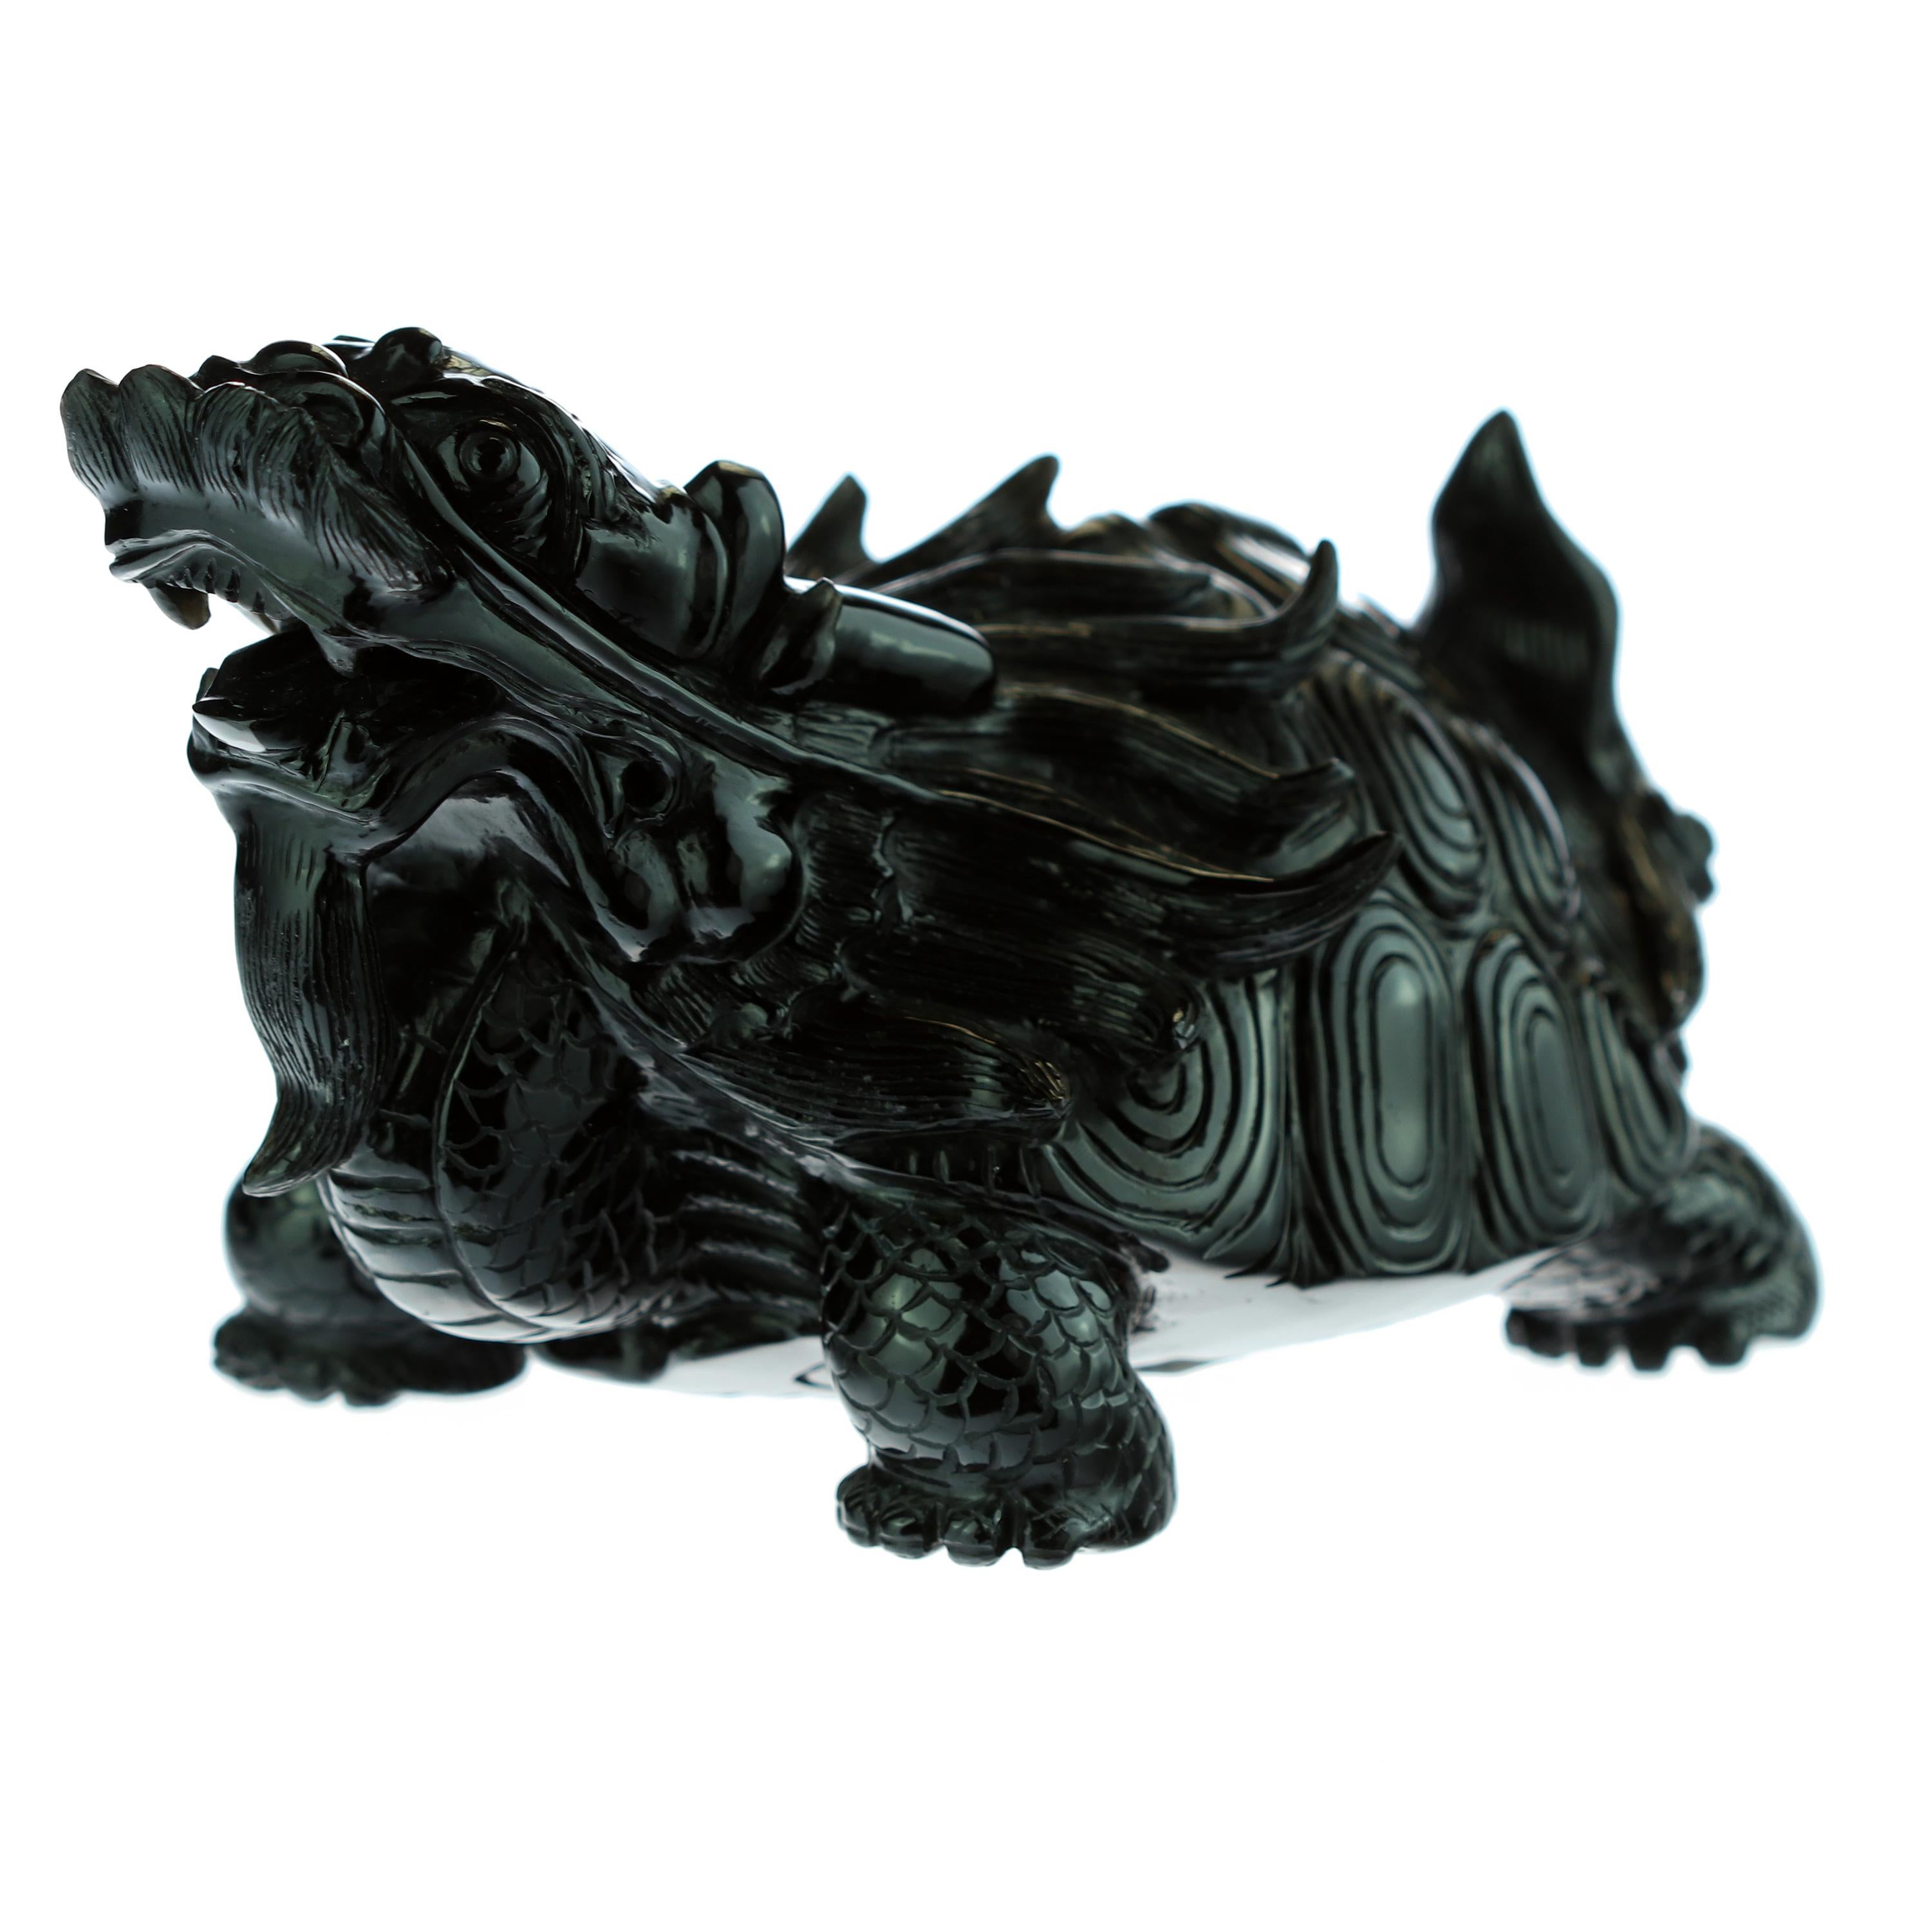 A marvelous mythological sculpture in obsidian. Chinese art, a turtle dragon creature that combines two of the four celestial animals. It had the body of a turtle and a dragon head. It symbolized courage, determination, fertility, longevity, power,